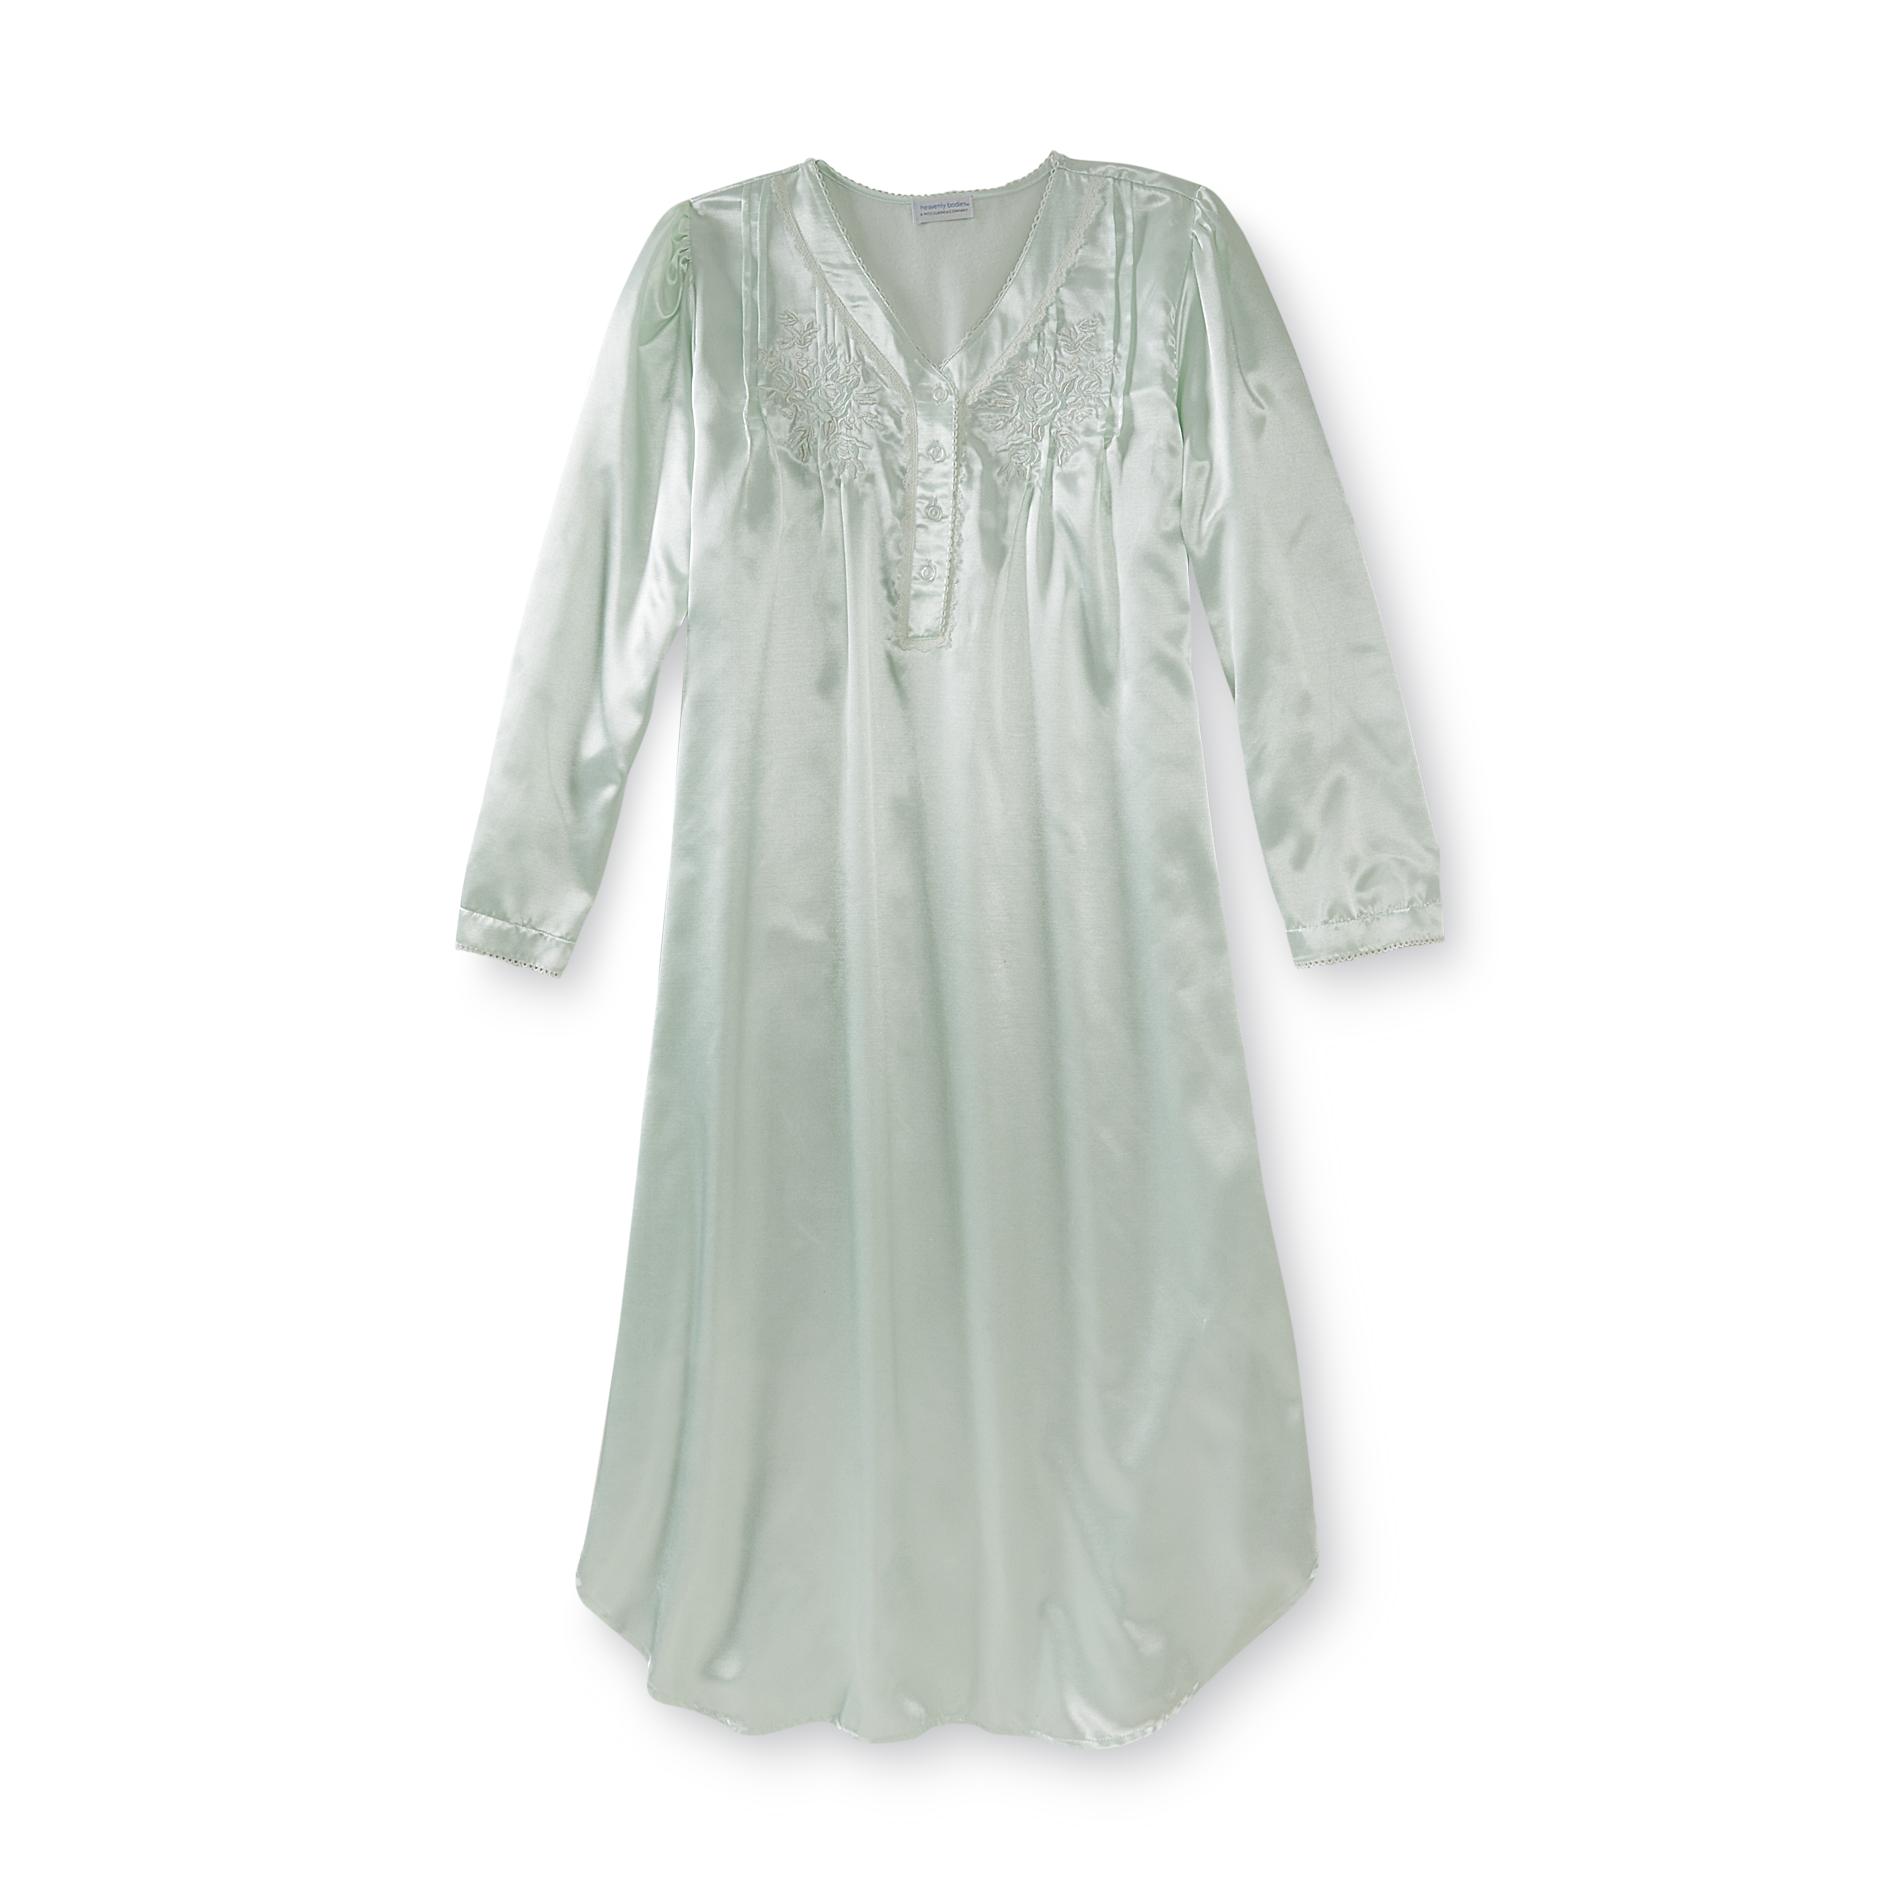 Heavenly Bodies by Miss Elaine Women's Long-Sleeve Satin Nightgown